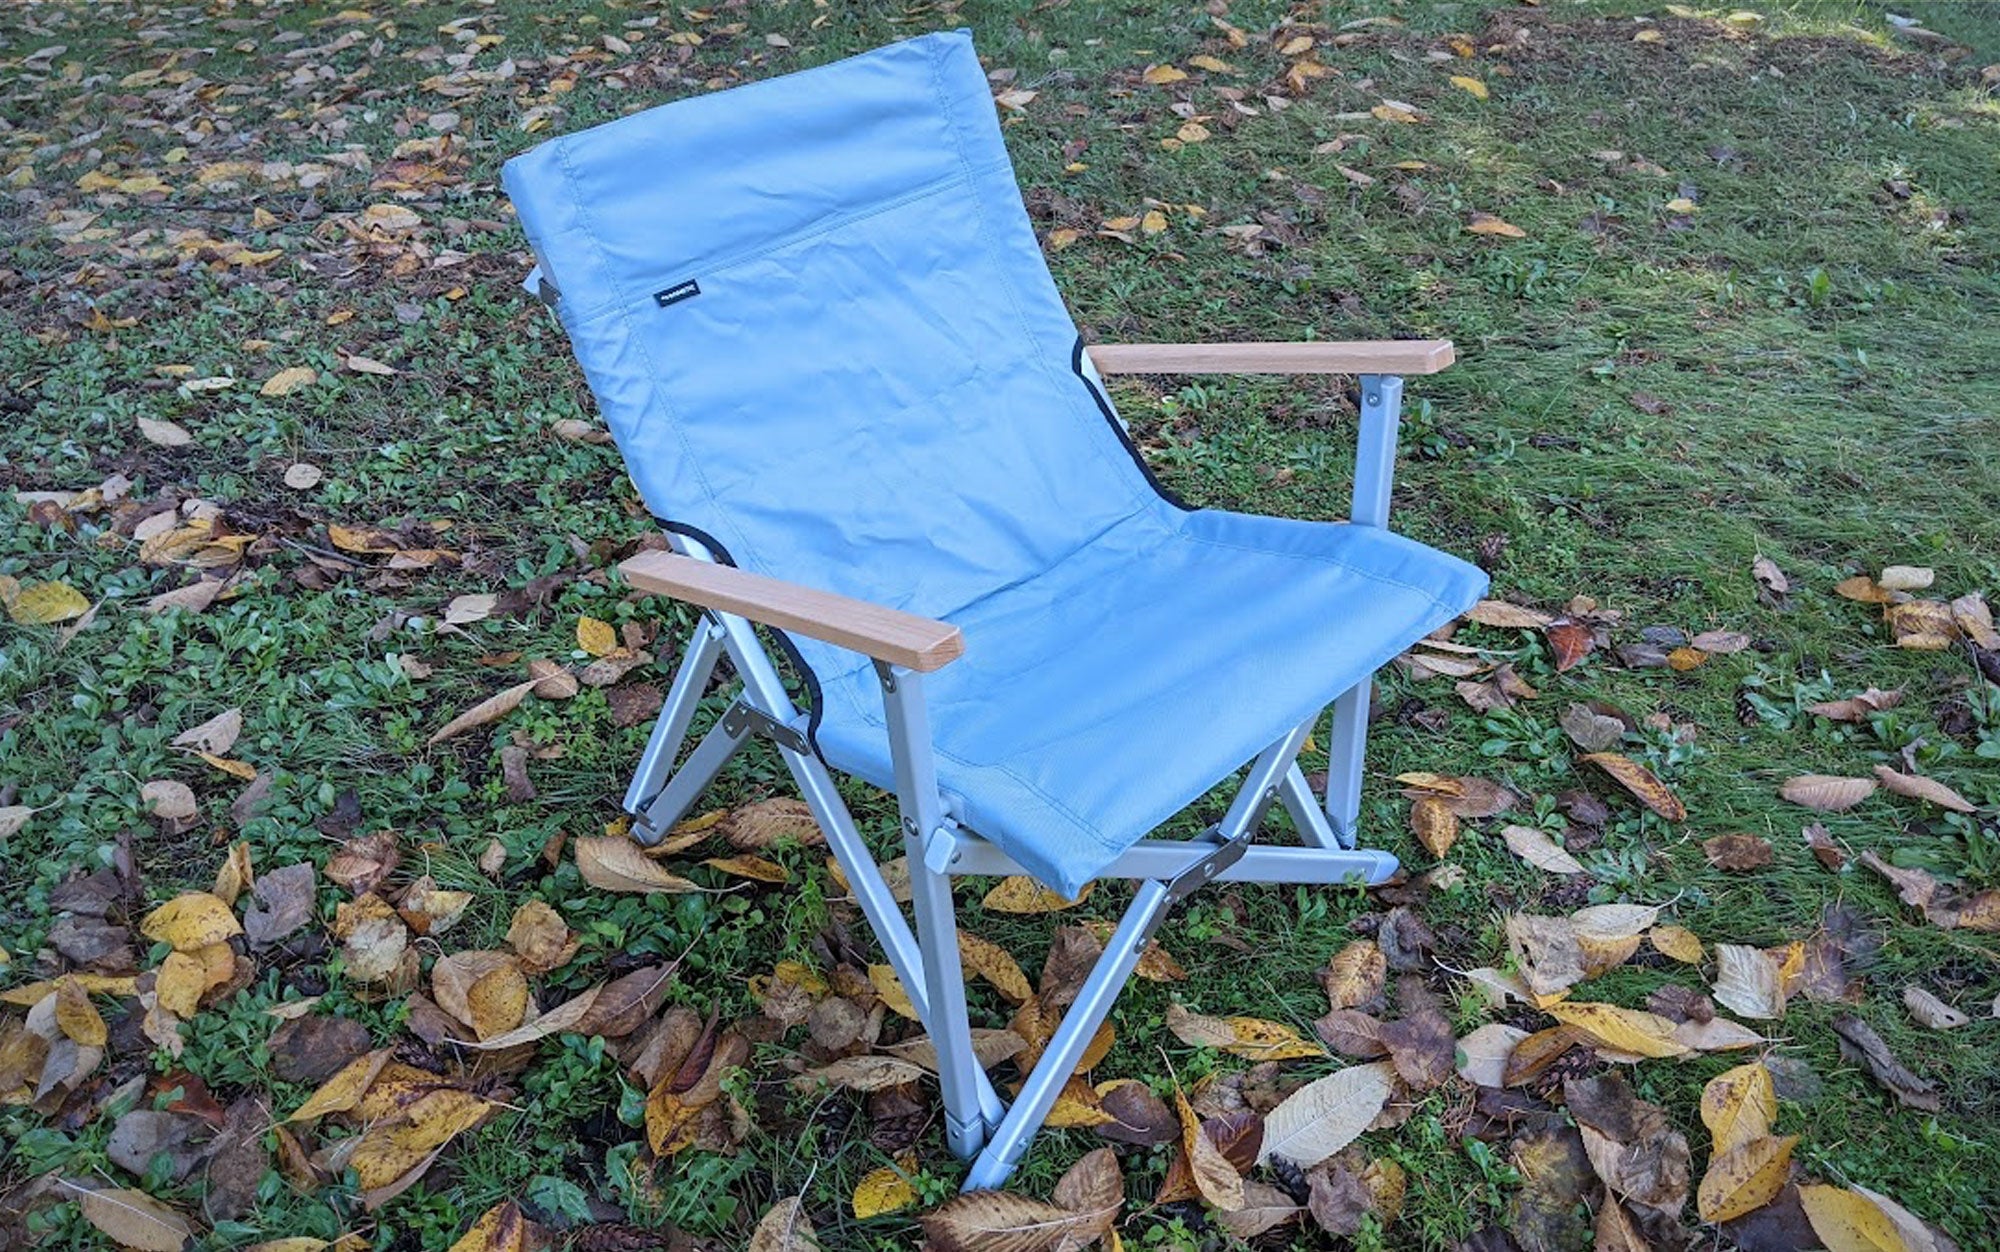 We tested the Dometic Go Camp Chair.